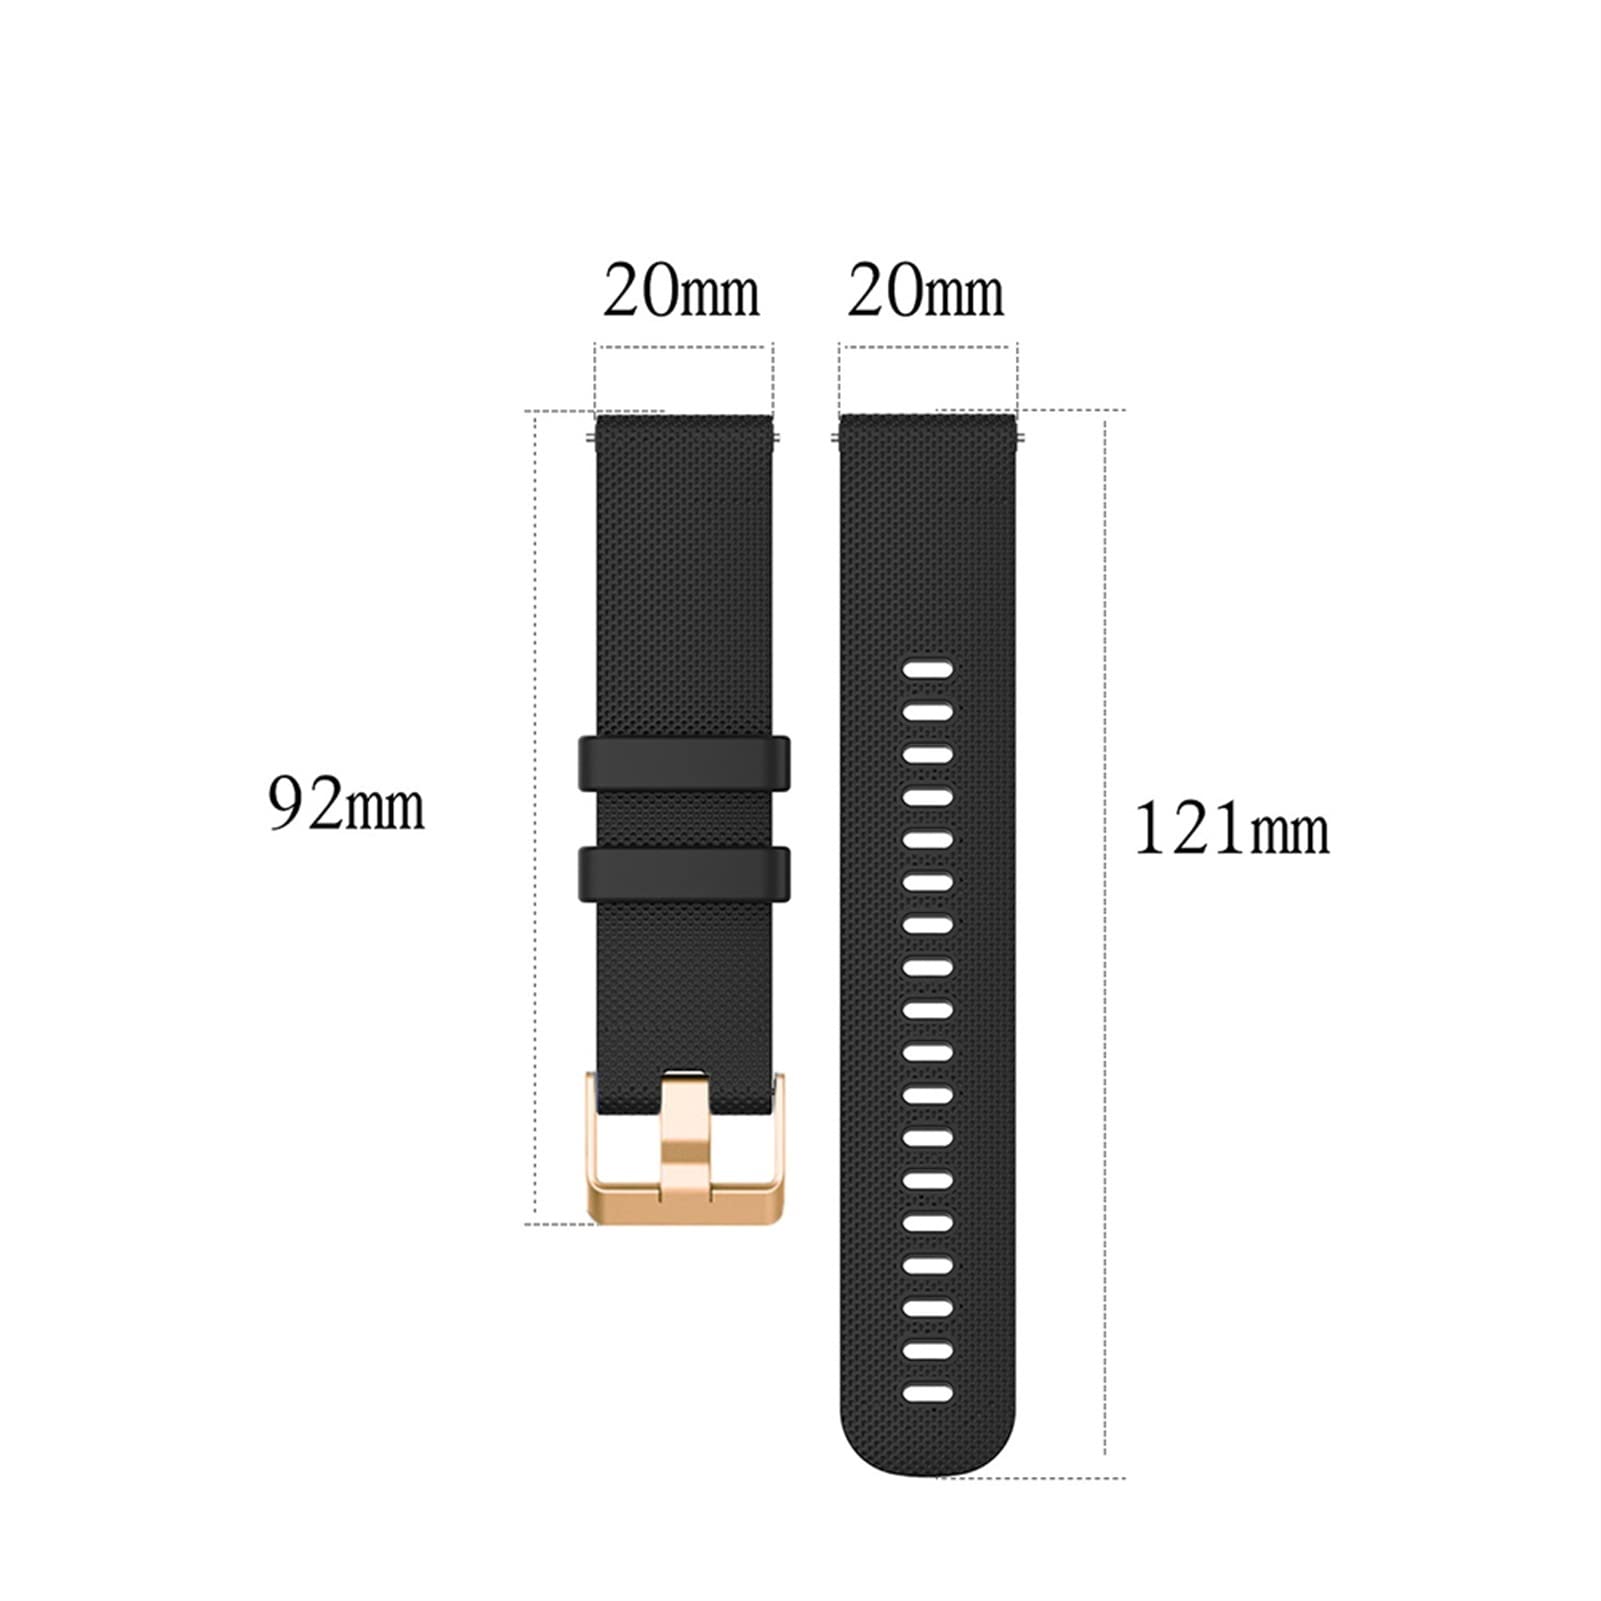 Wscebck Replacement Watchband for SUUNTO 3 Fitness Silicone Bracelet Sport Wristband Strap for SUUNTO 3 Fitness Smart Watch 20mm Strap (Color : 12, Size : for SUUNTO 3 Fitness)